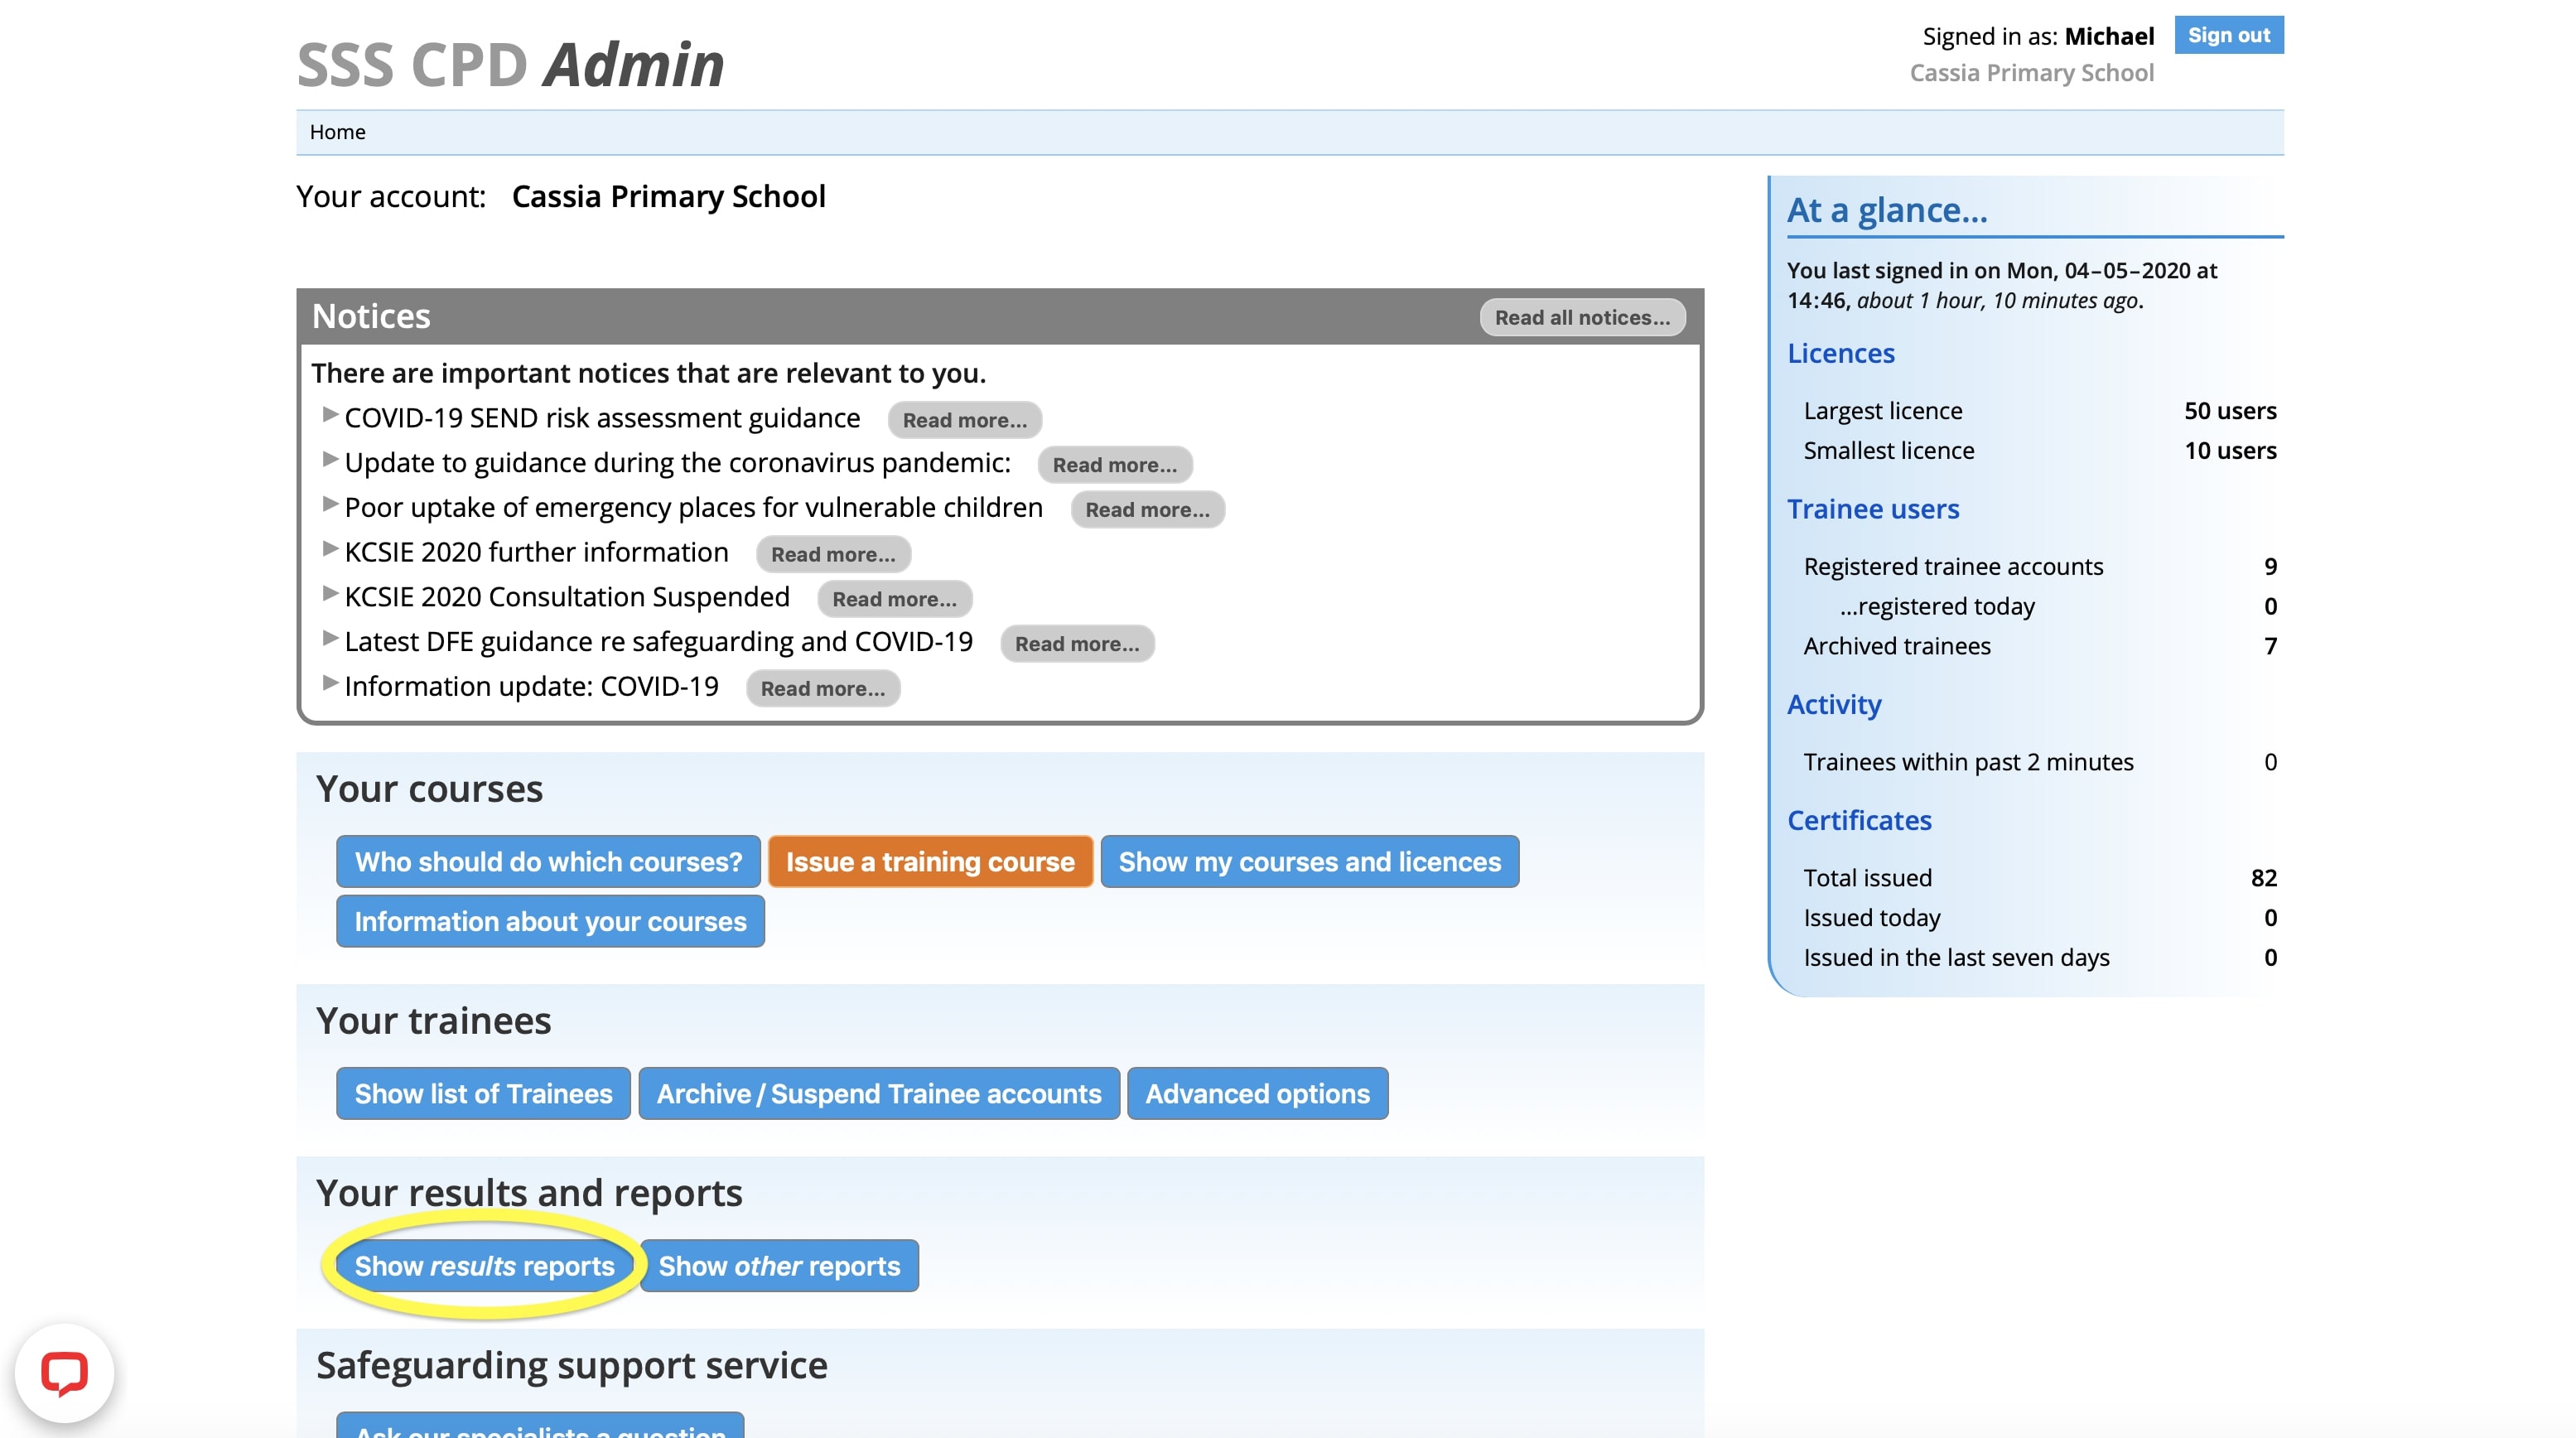 Admin Dashboard - show safeguarding training results reports